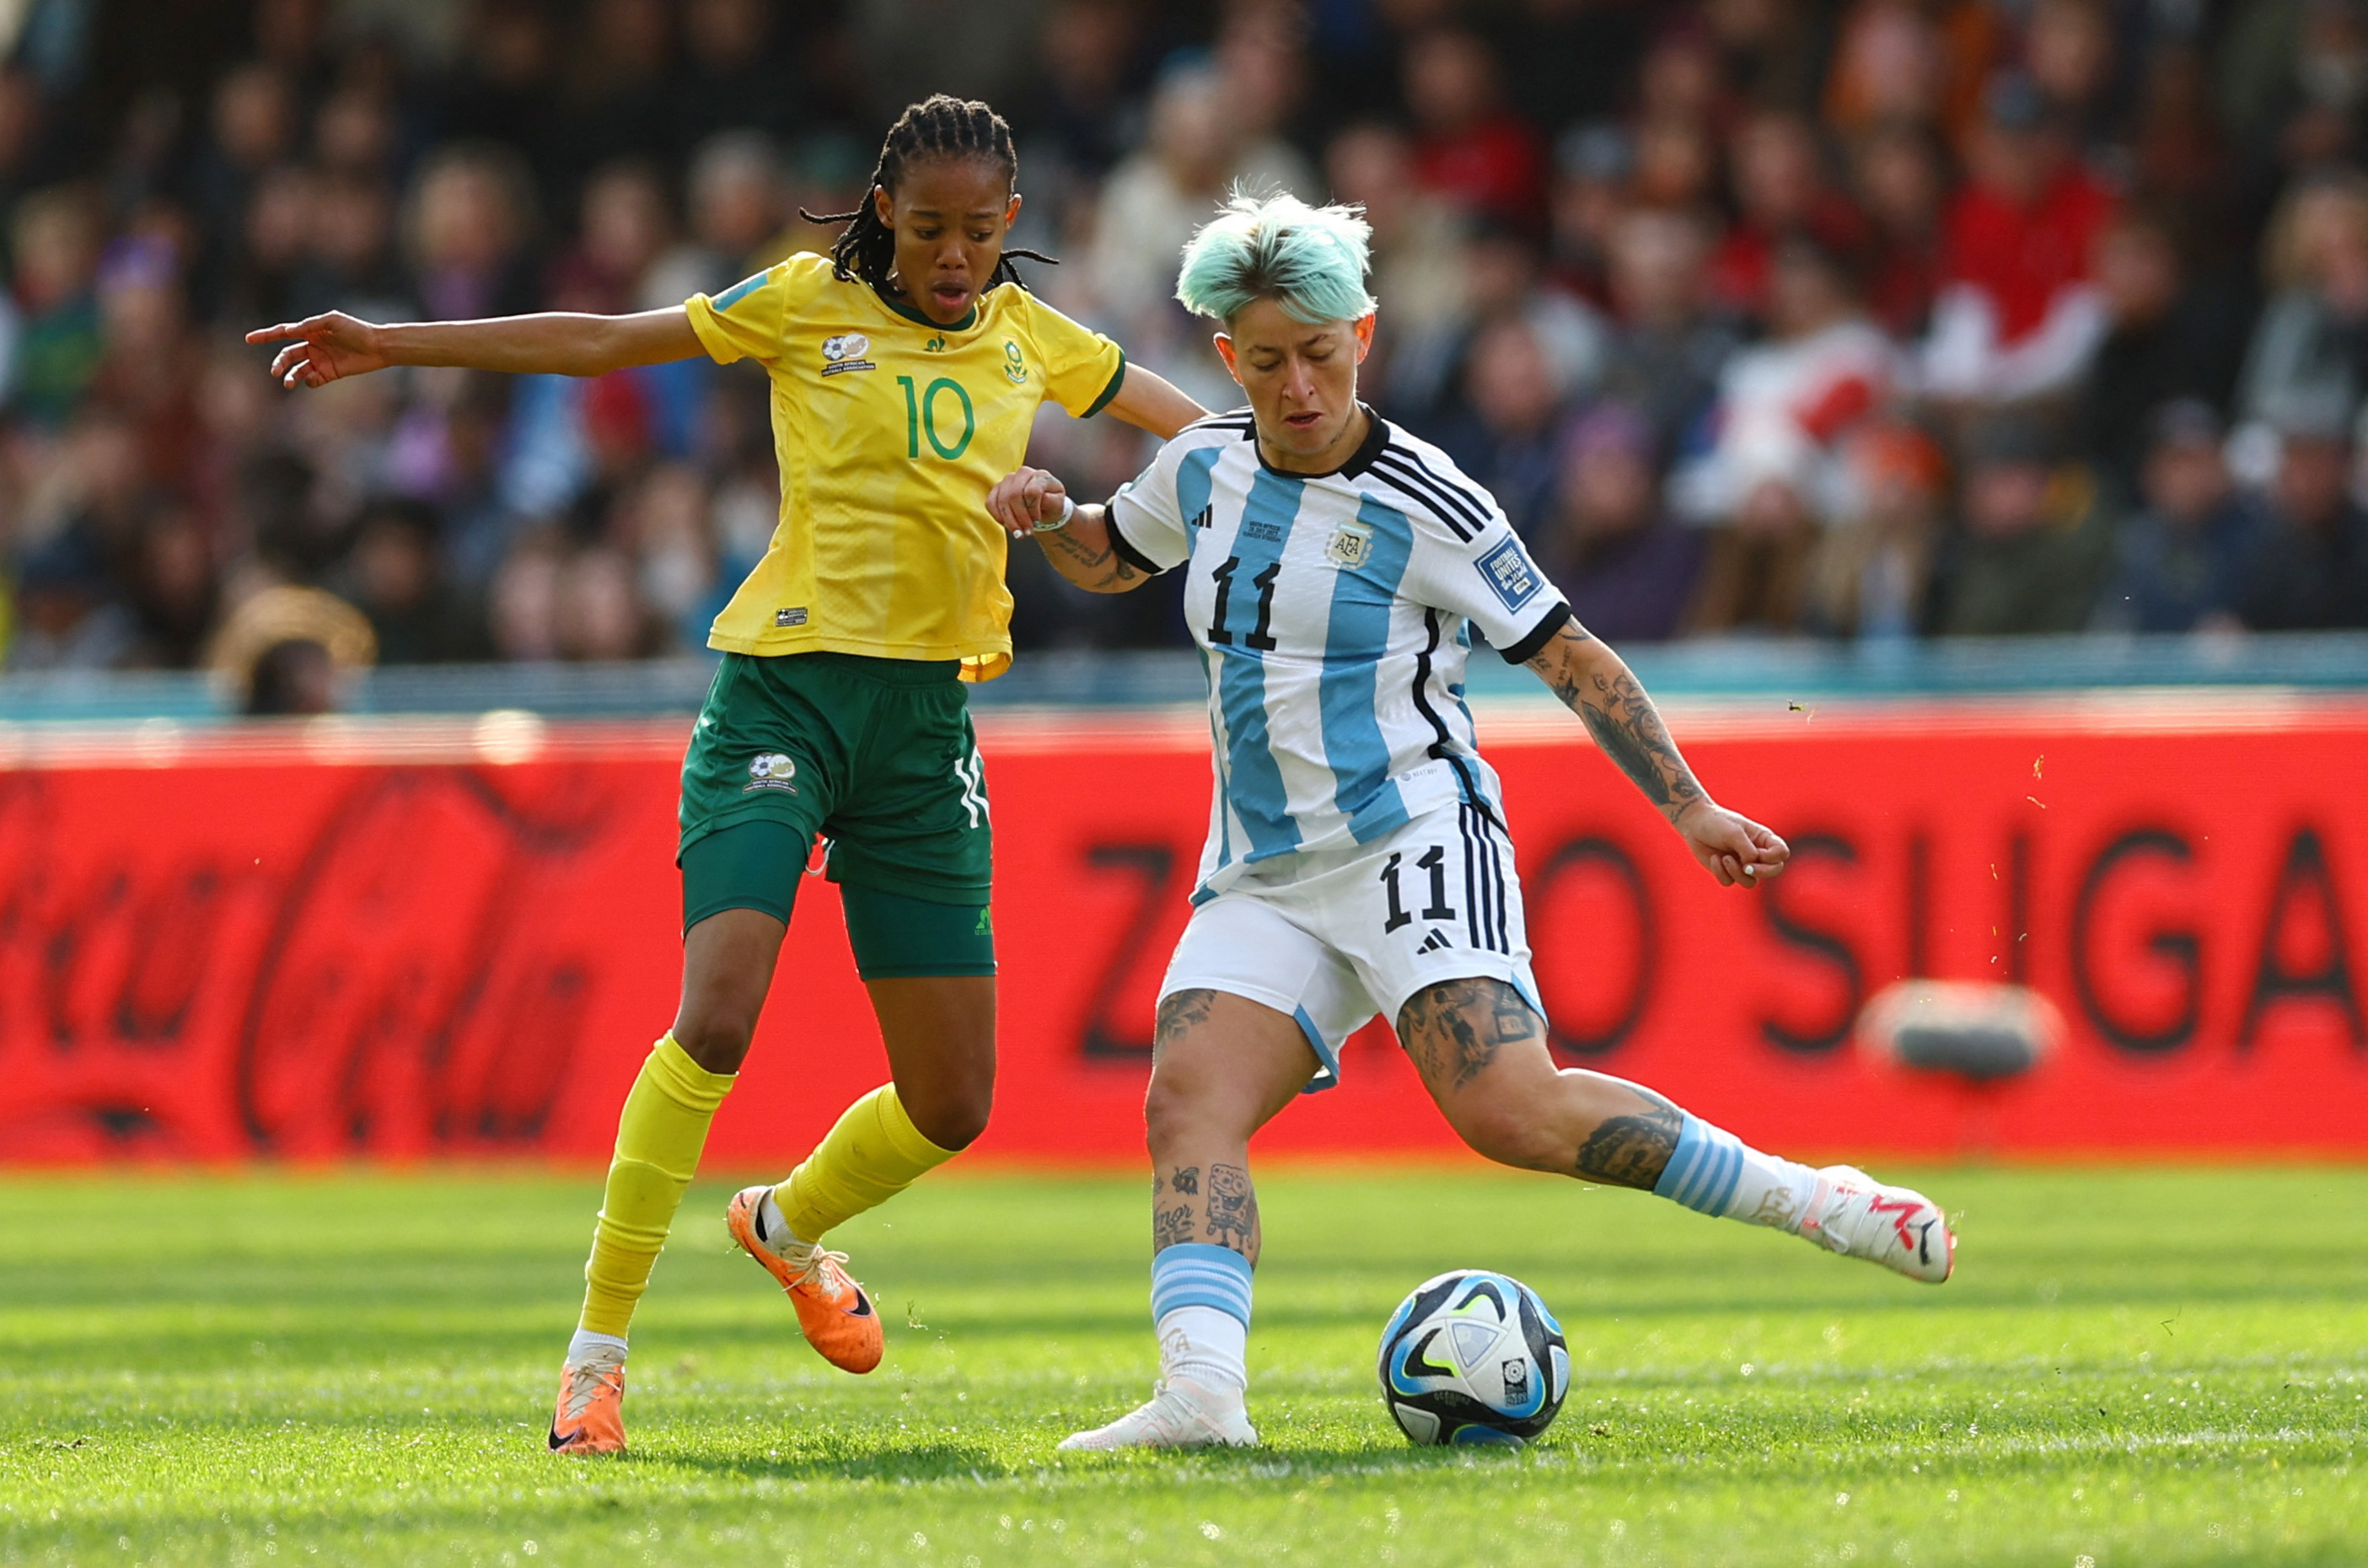 Argentina, South Africa hopes dented by thrilling draw